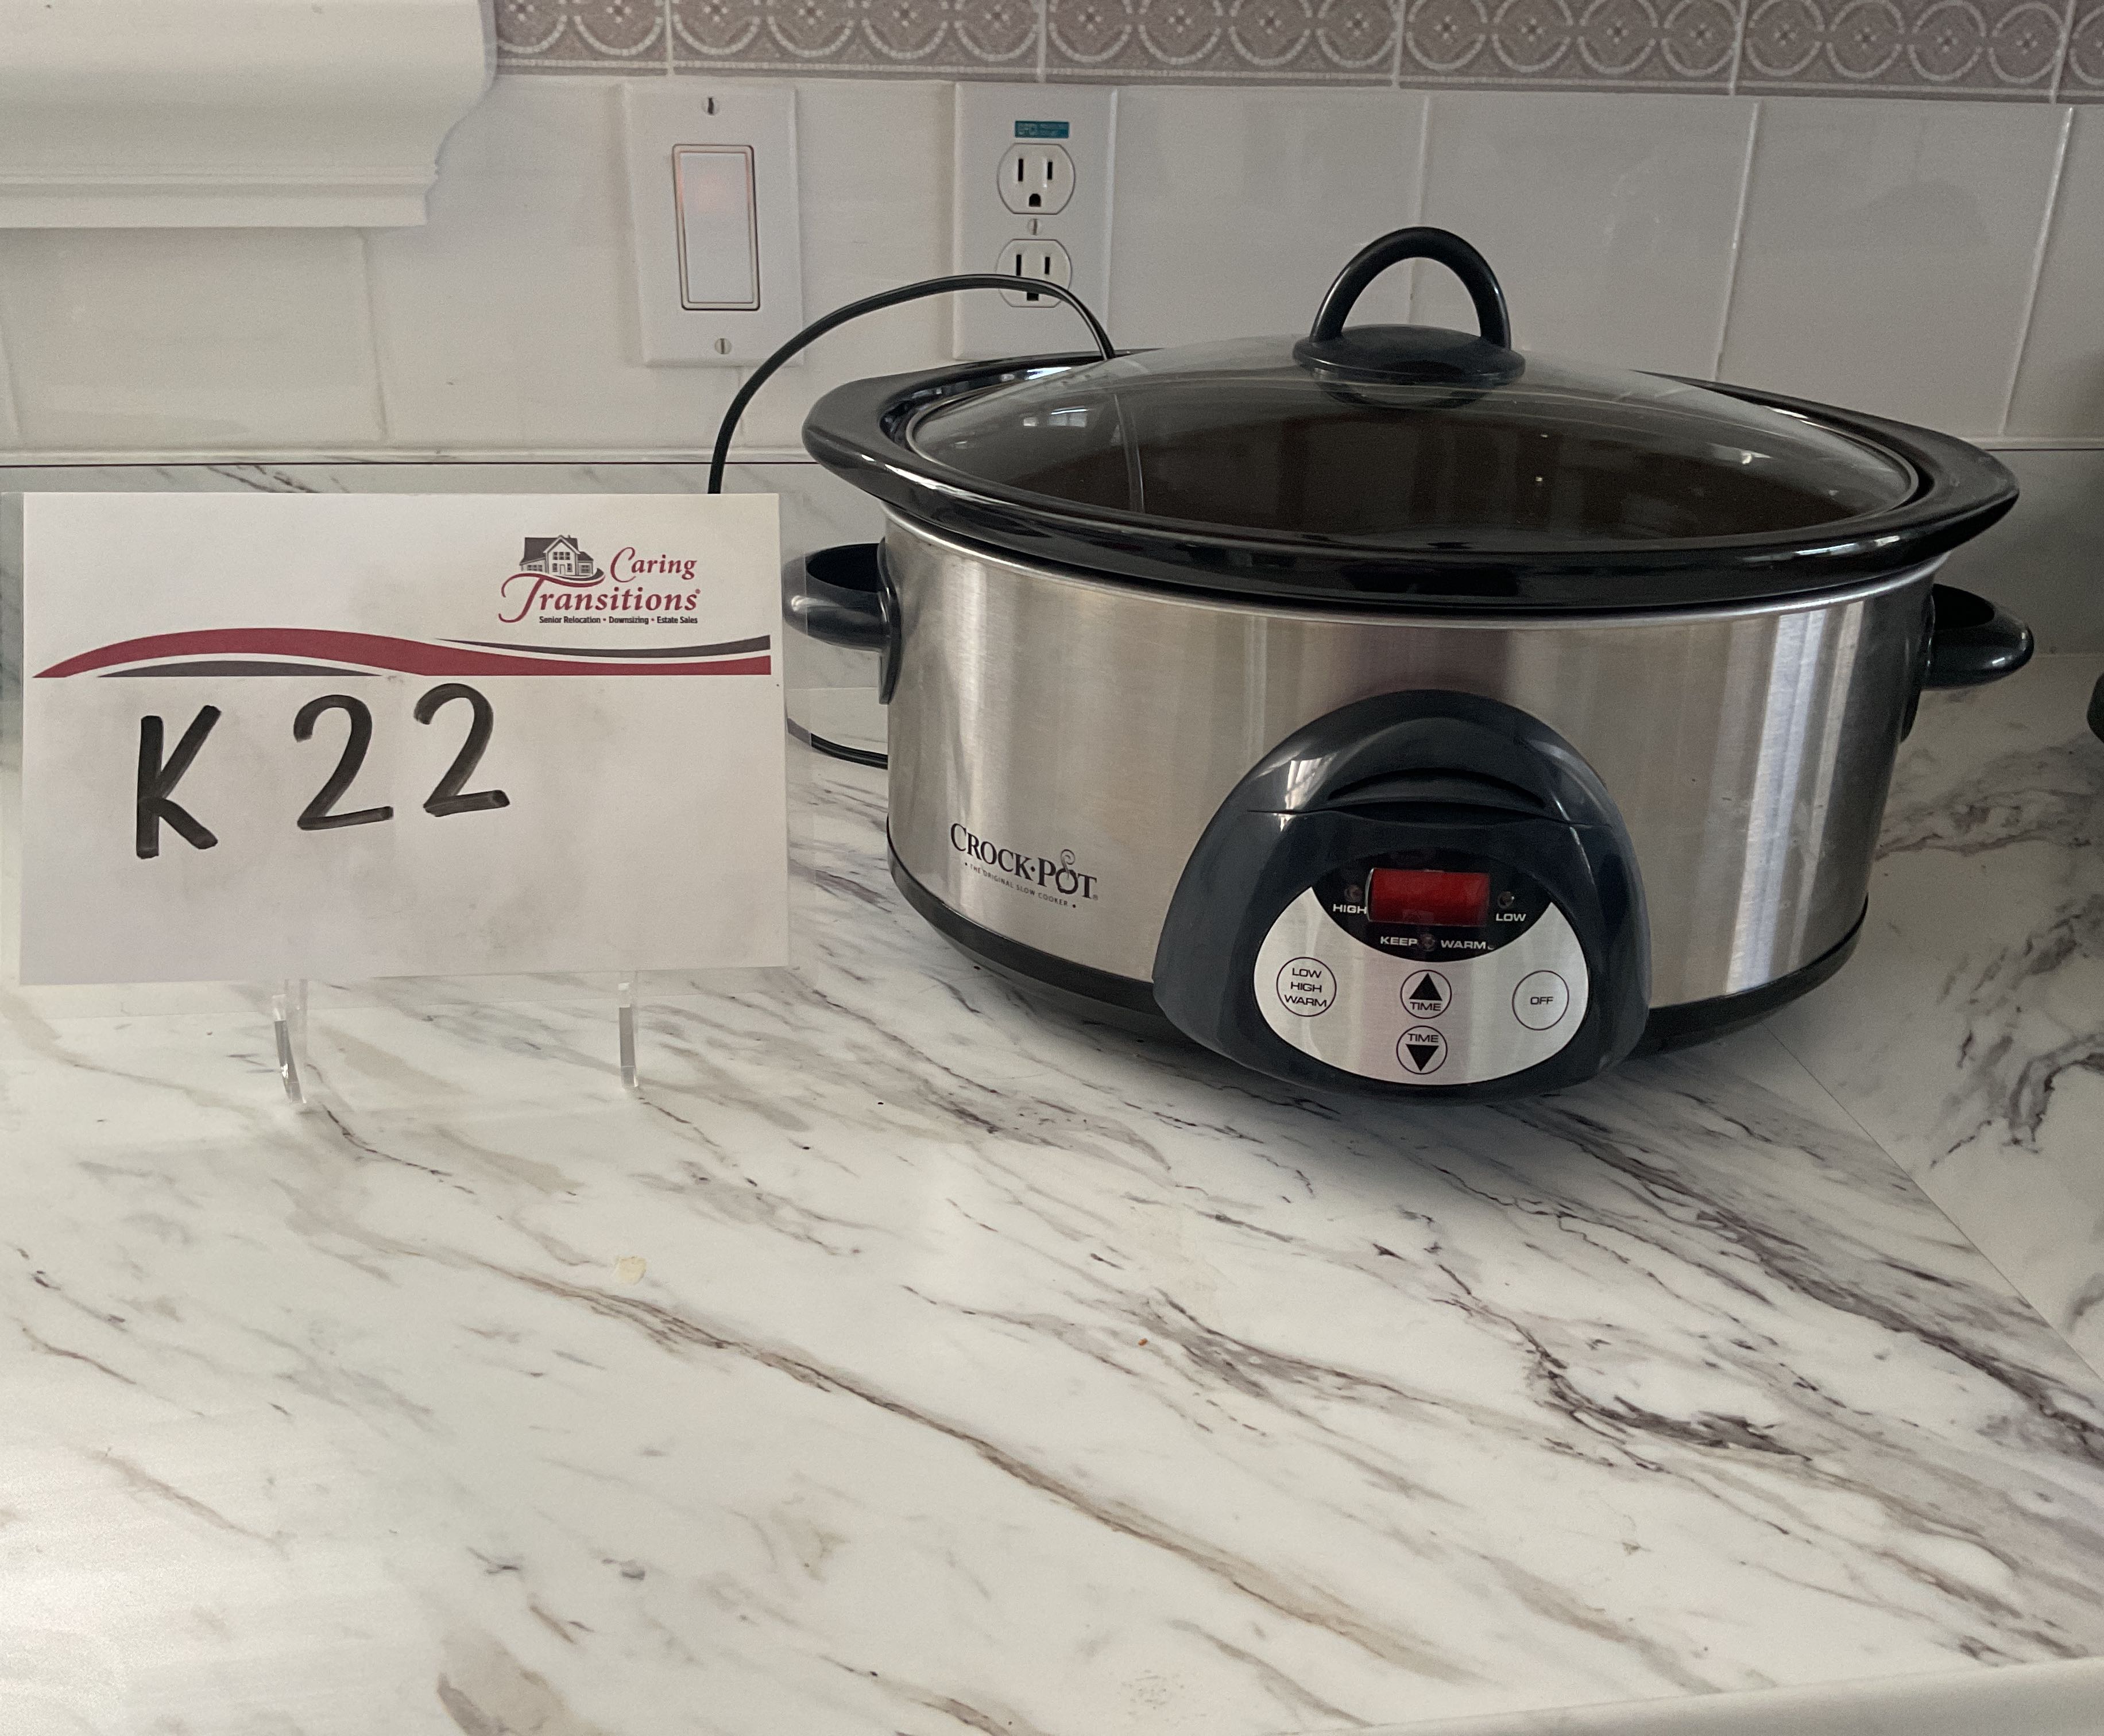 Large-Crockpot-Brand-Slow-Cooker-With-Rack